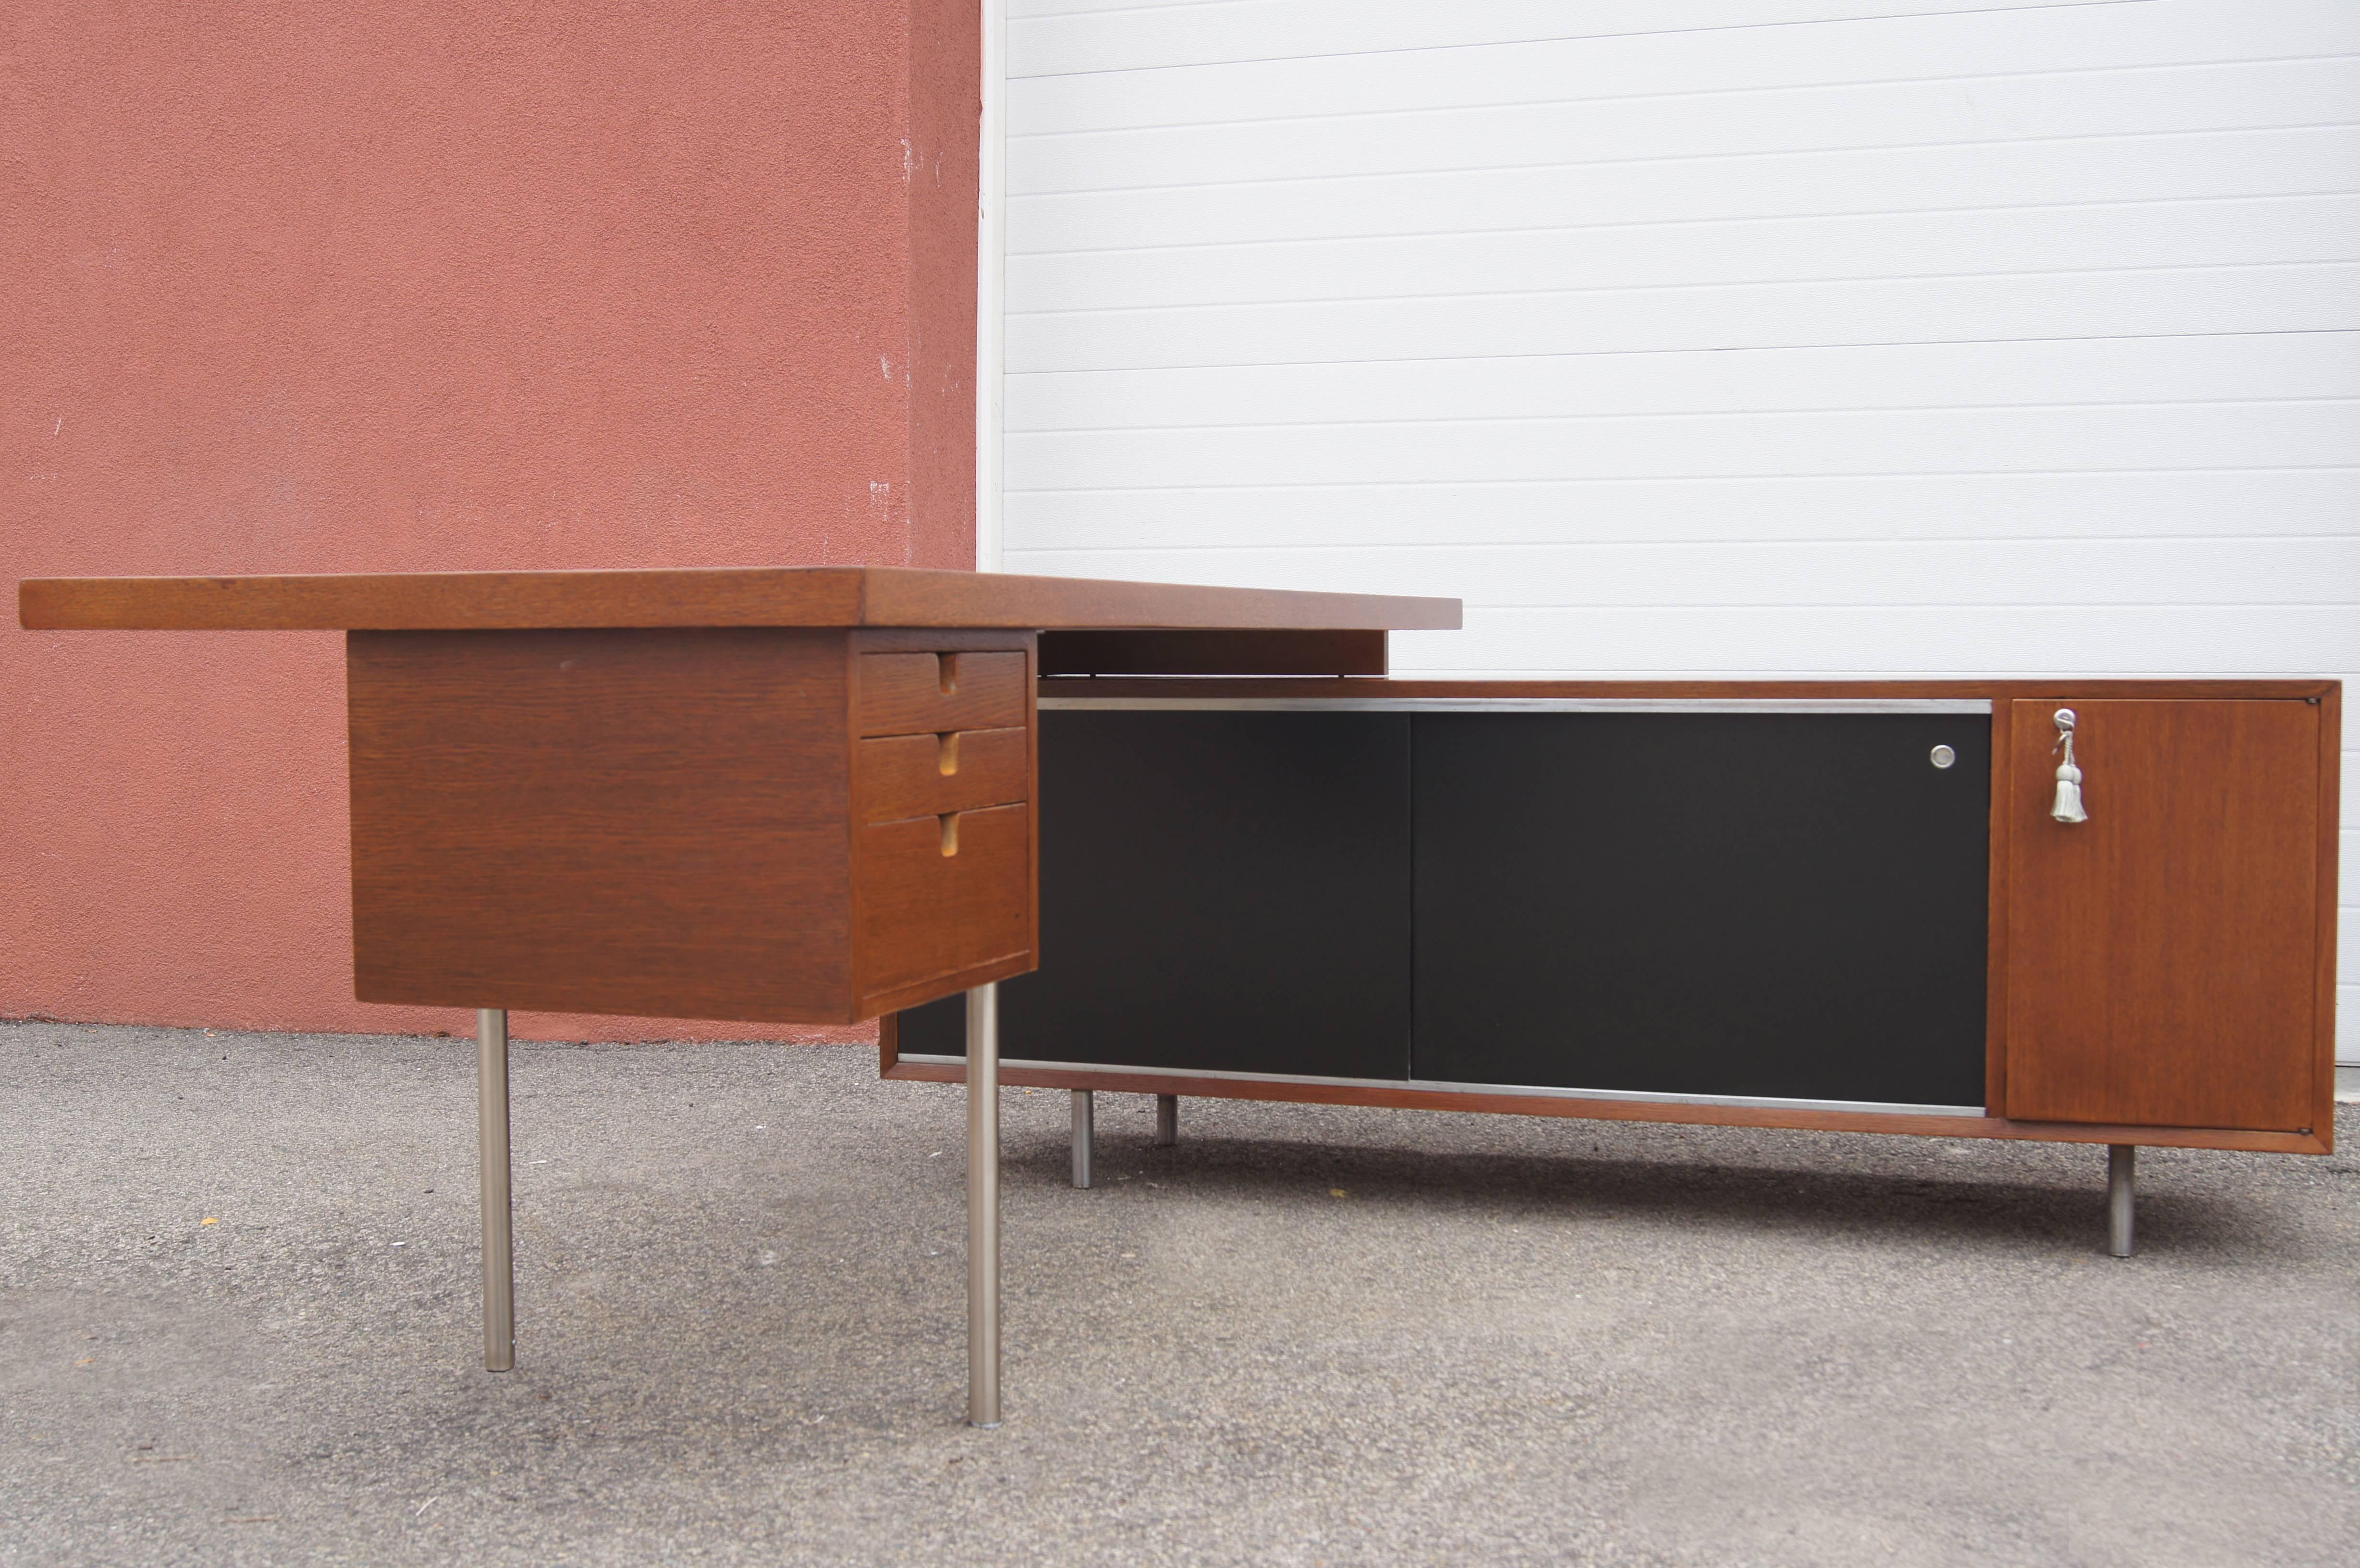 Mindful of the needs of architecture firms and other creative environments, George Nelson designed this tawny walnut desk and storage unit as part of Herman Miller's Executive Office Group. A free-floating work surface (7230-L) with a three-drawer